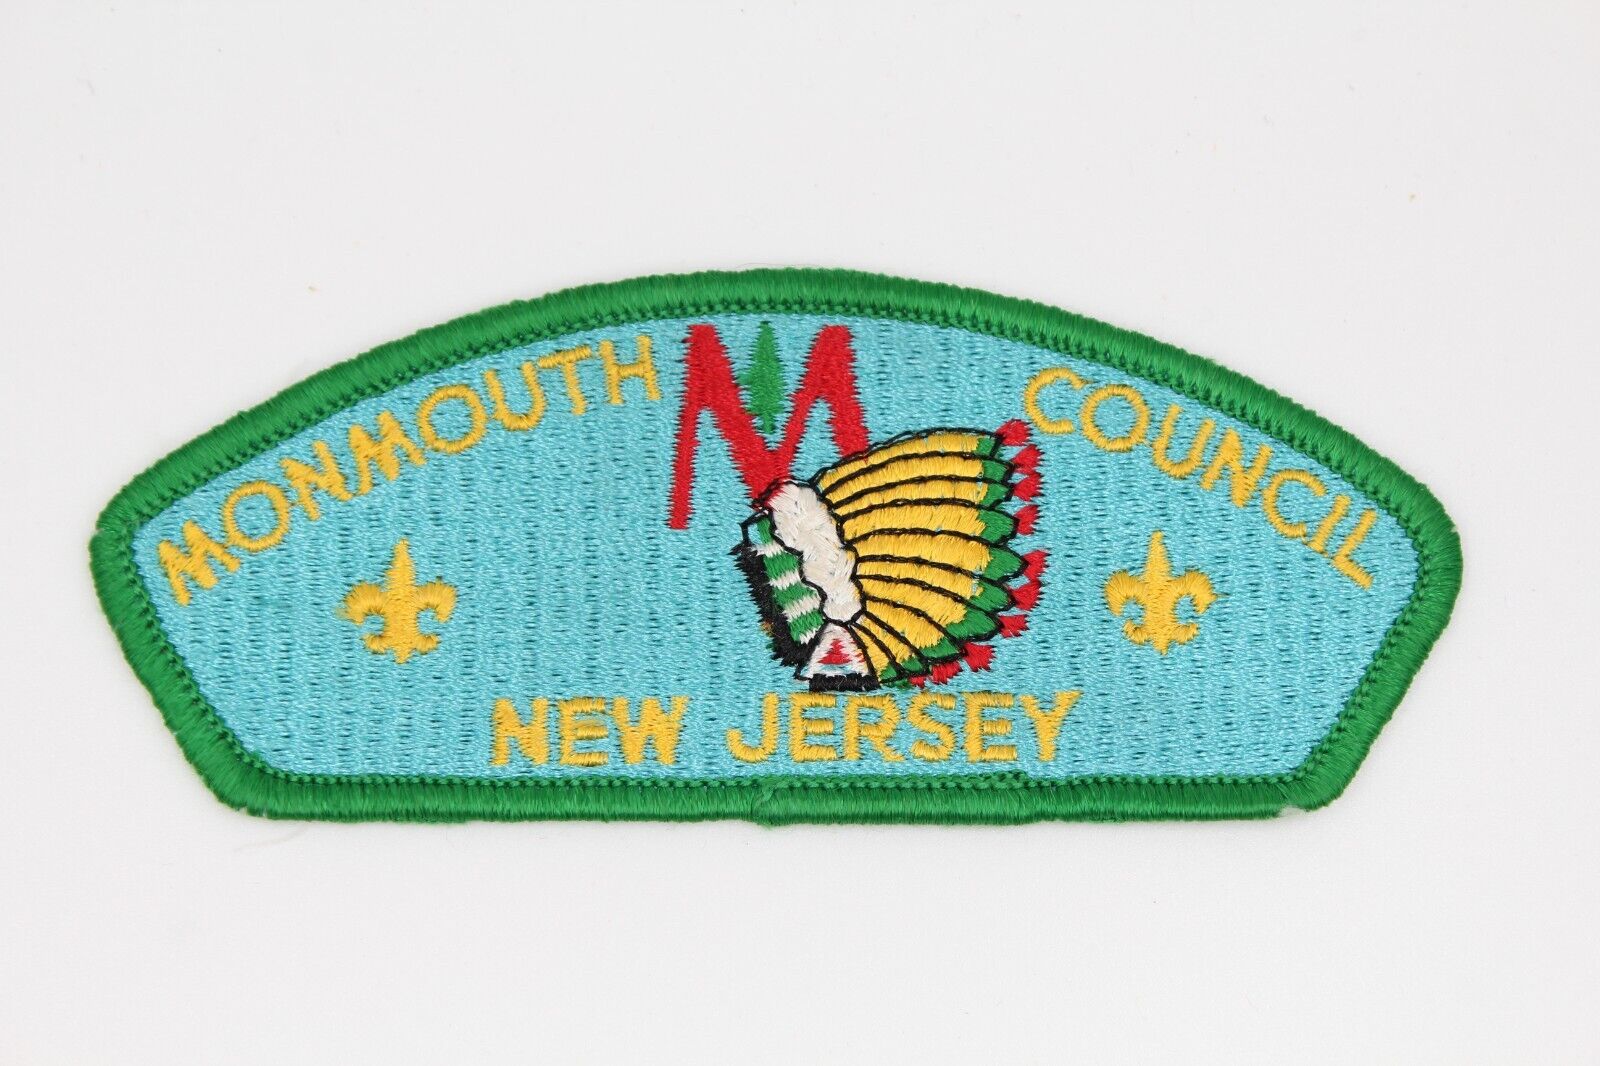 Monmouth Council CSP New Jersey NJ Boy Scouts Patch BSA 